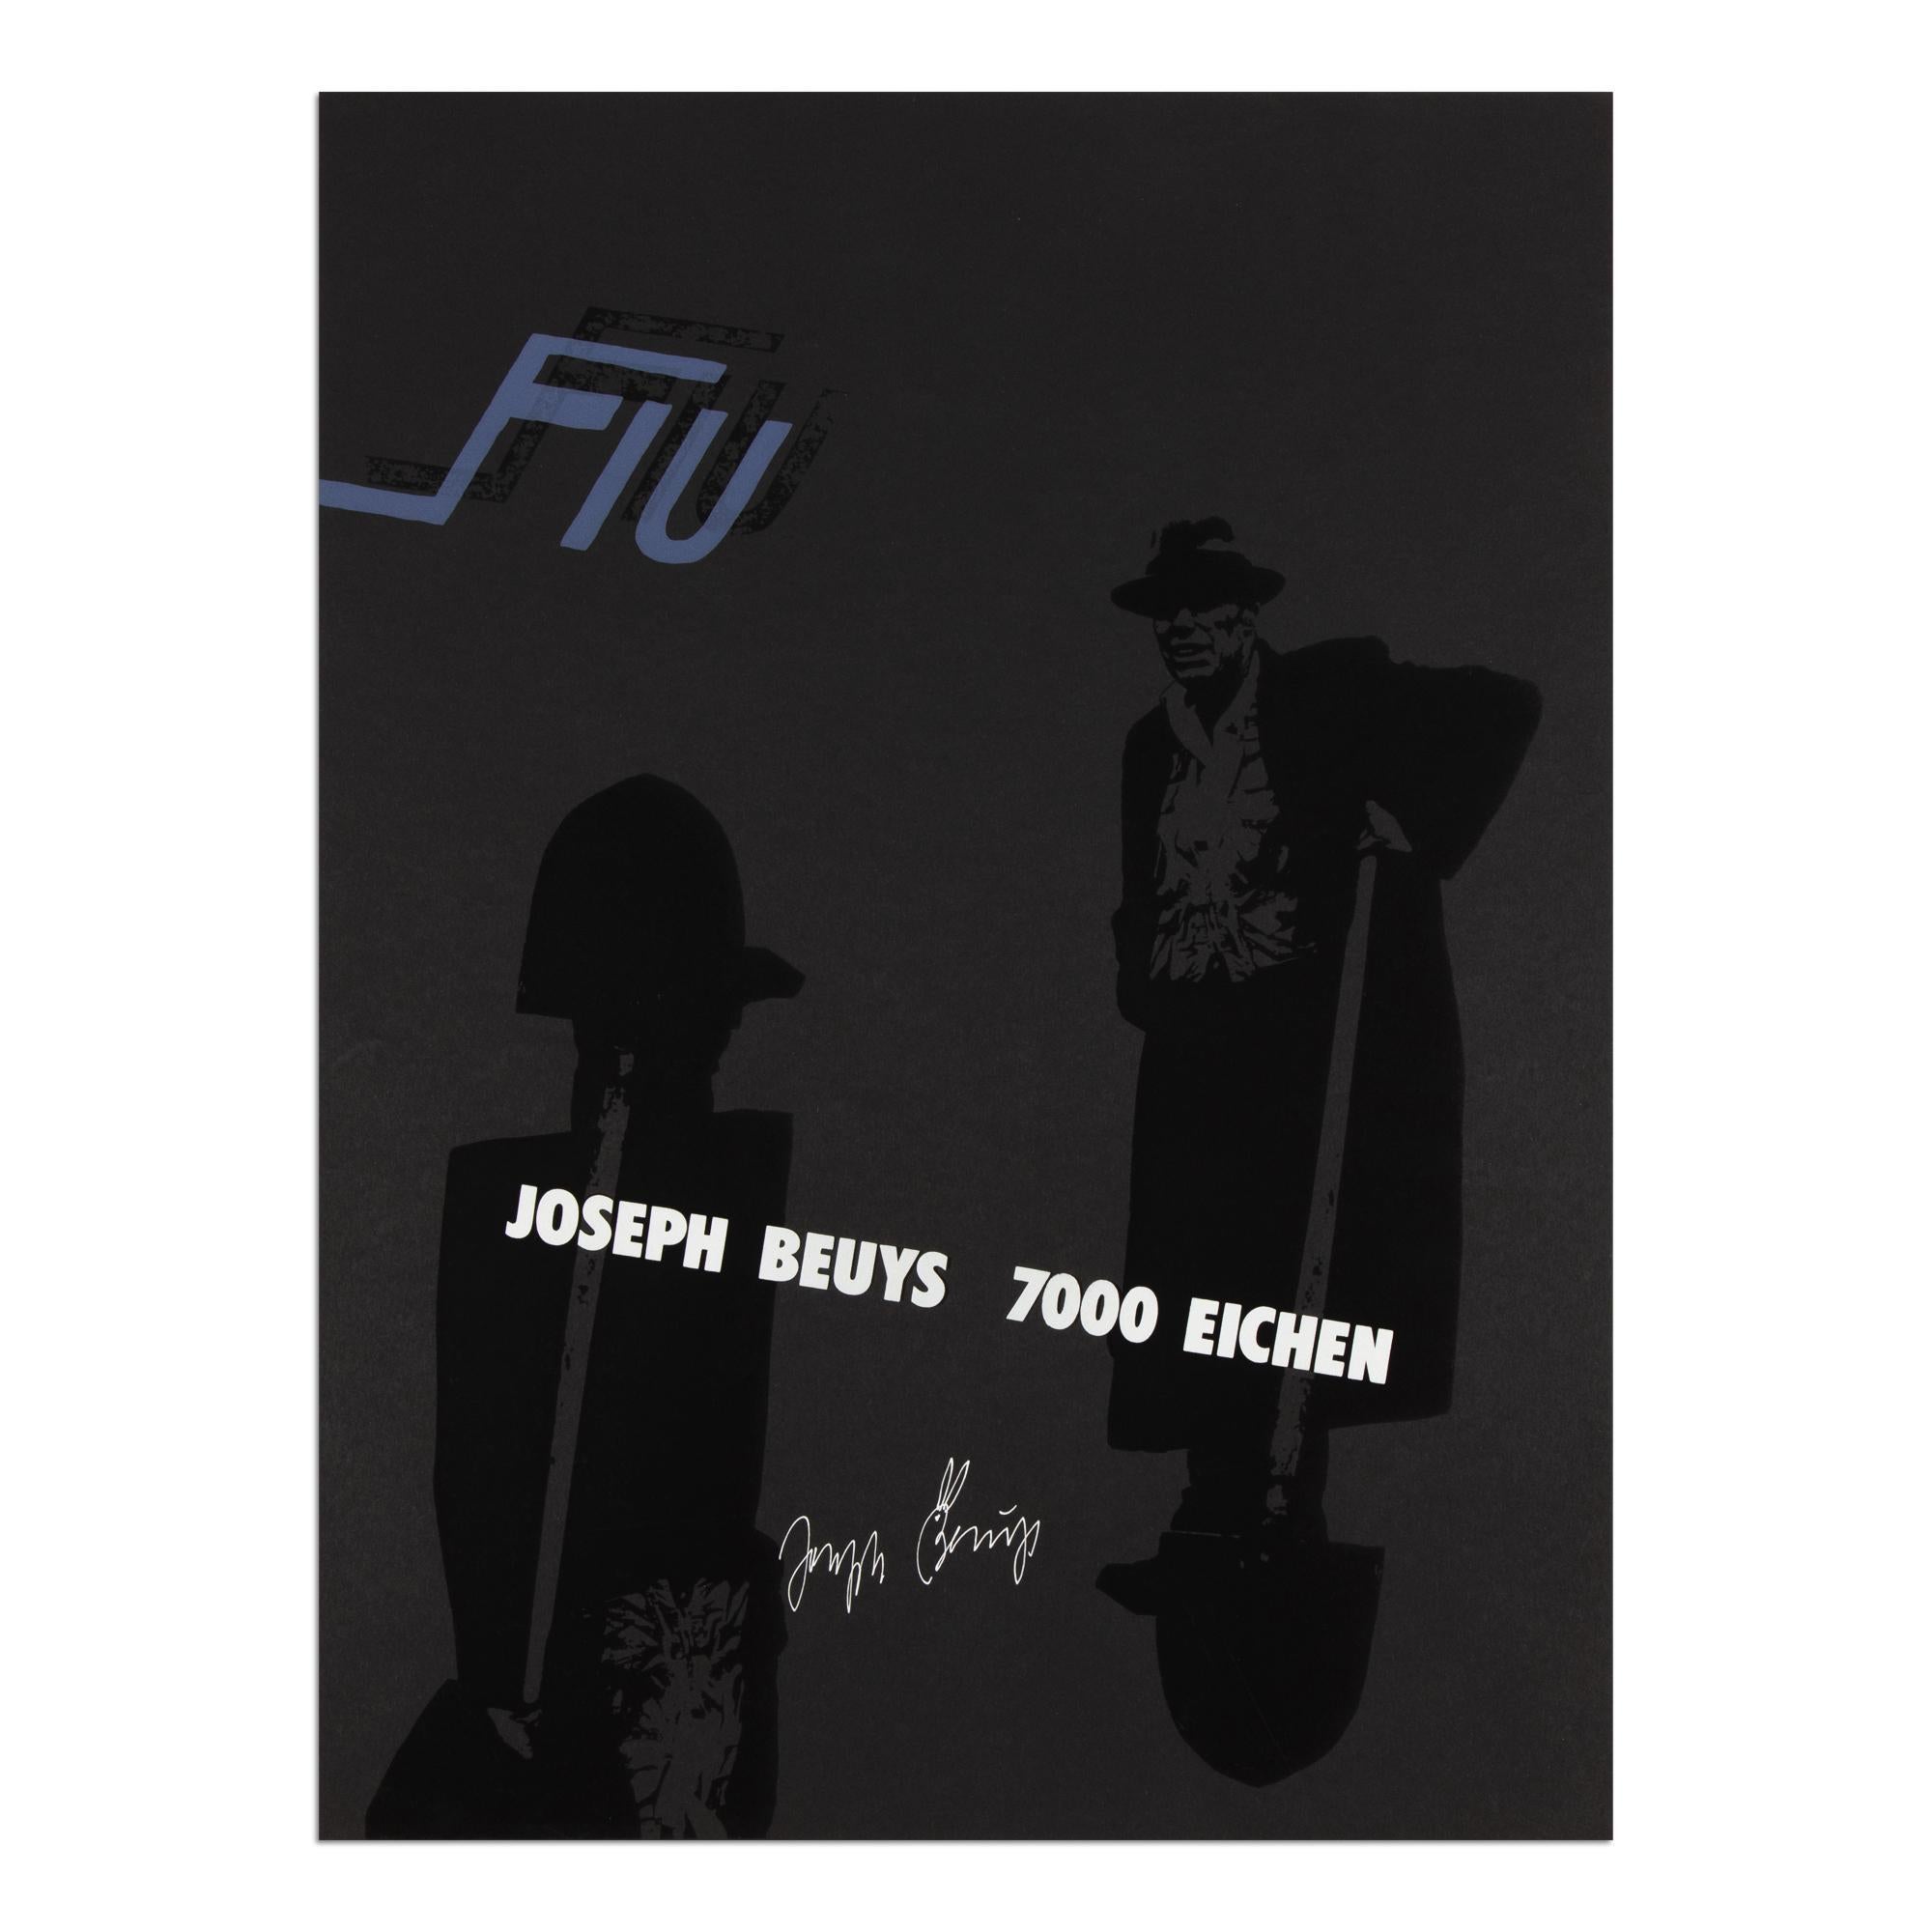 Joseph Beuys (German, 1921-1986)
FIU Joseph Beuys, 7000 Eichen, 1982
Medium: Screenprint on black card stock
Dimensions: 61.5 x 45.8 cm
Edition of 100: Hand-signed in silver
Condition: Excellent